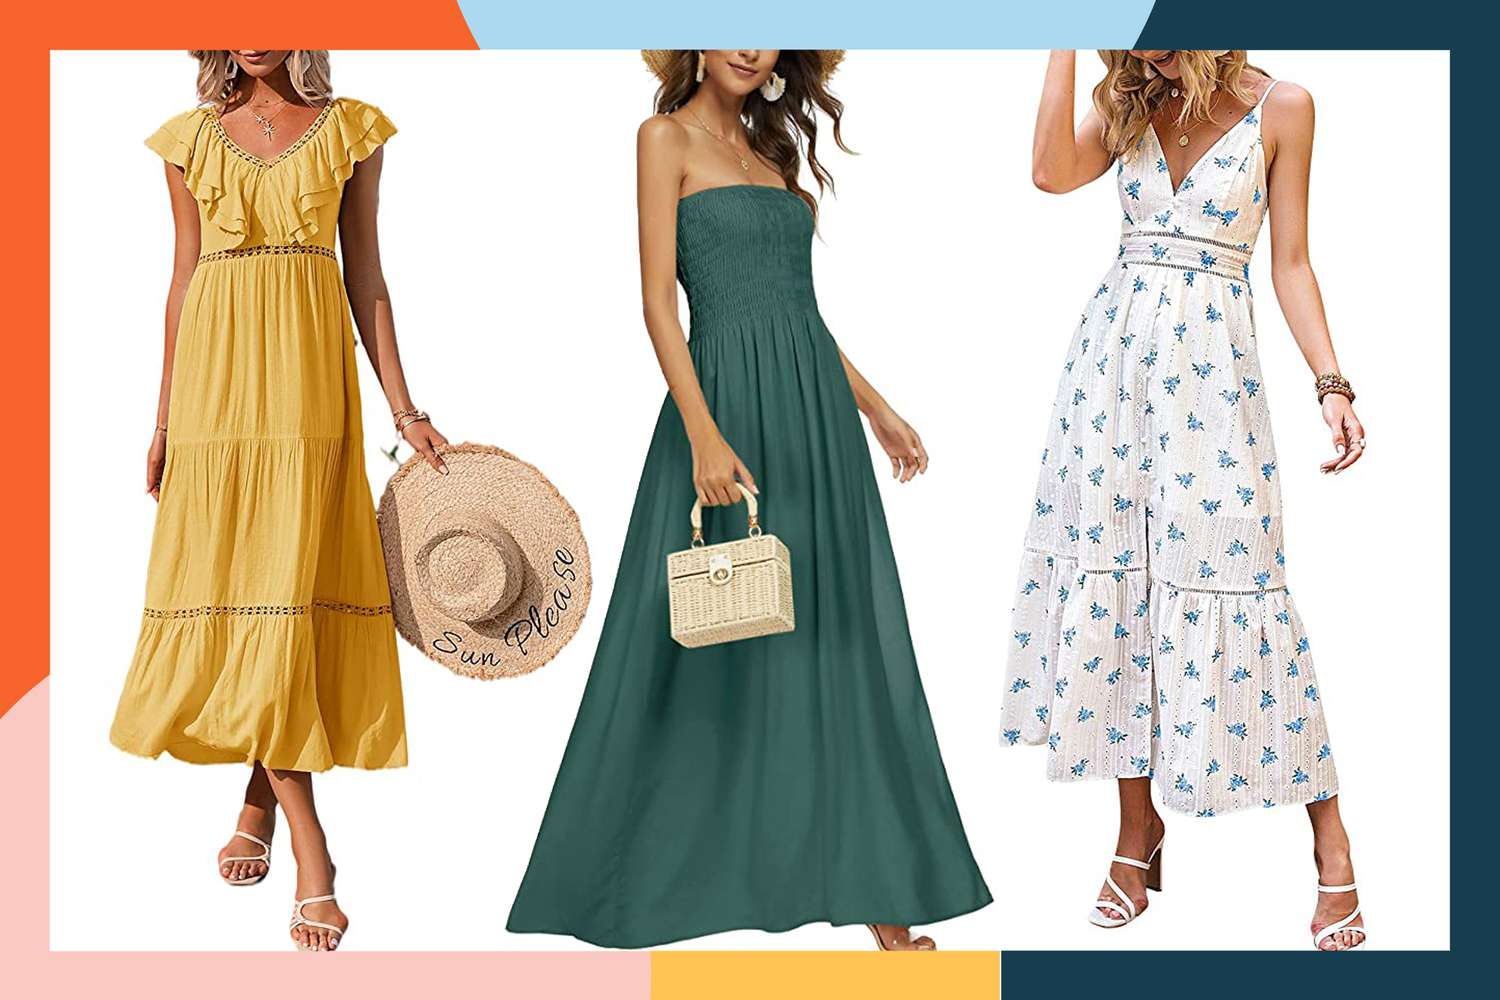 Amazon's Secret Outlet Has 600+ Deals on Cute Sundresses for Memorial Day Weekend — Prices Start at 